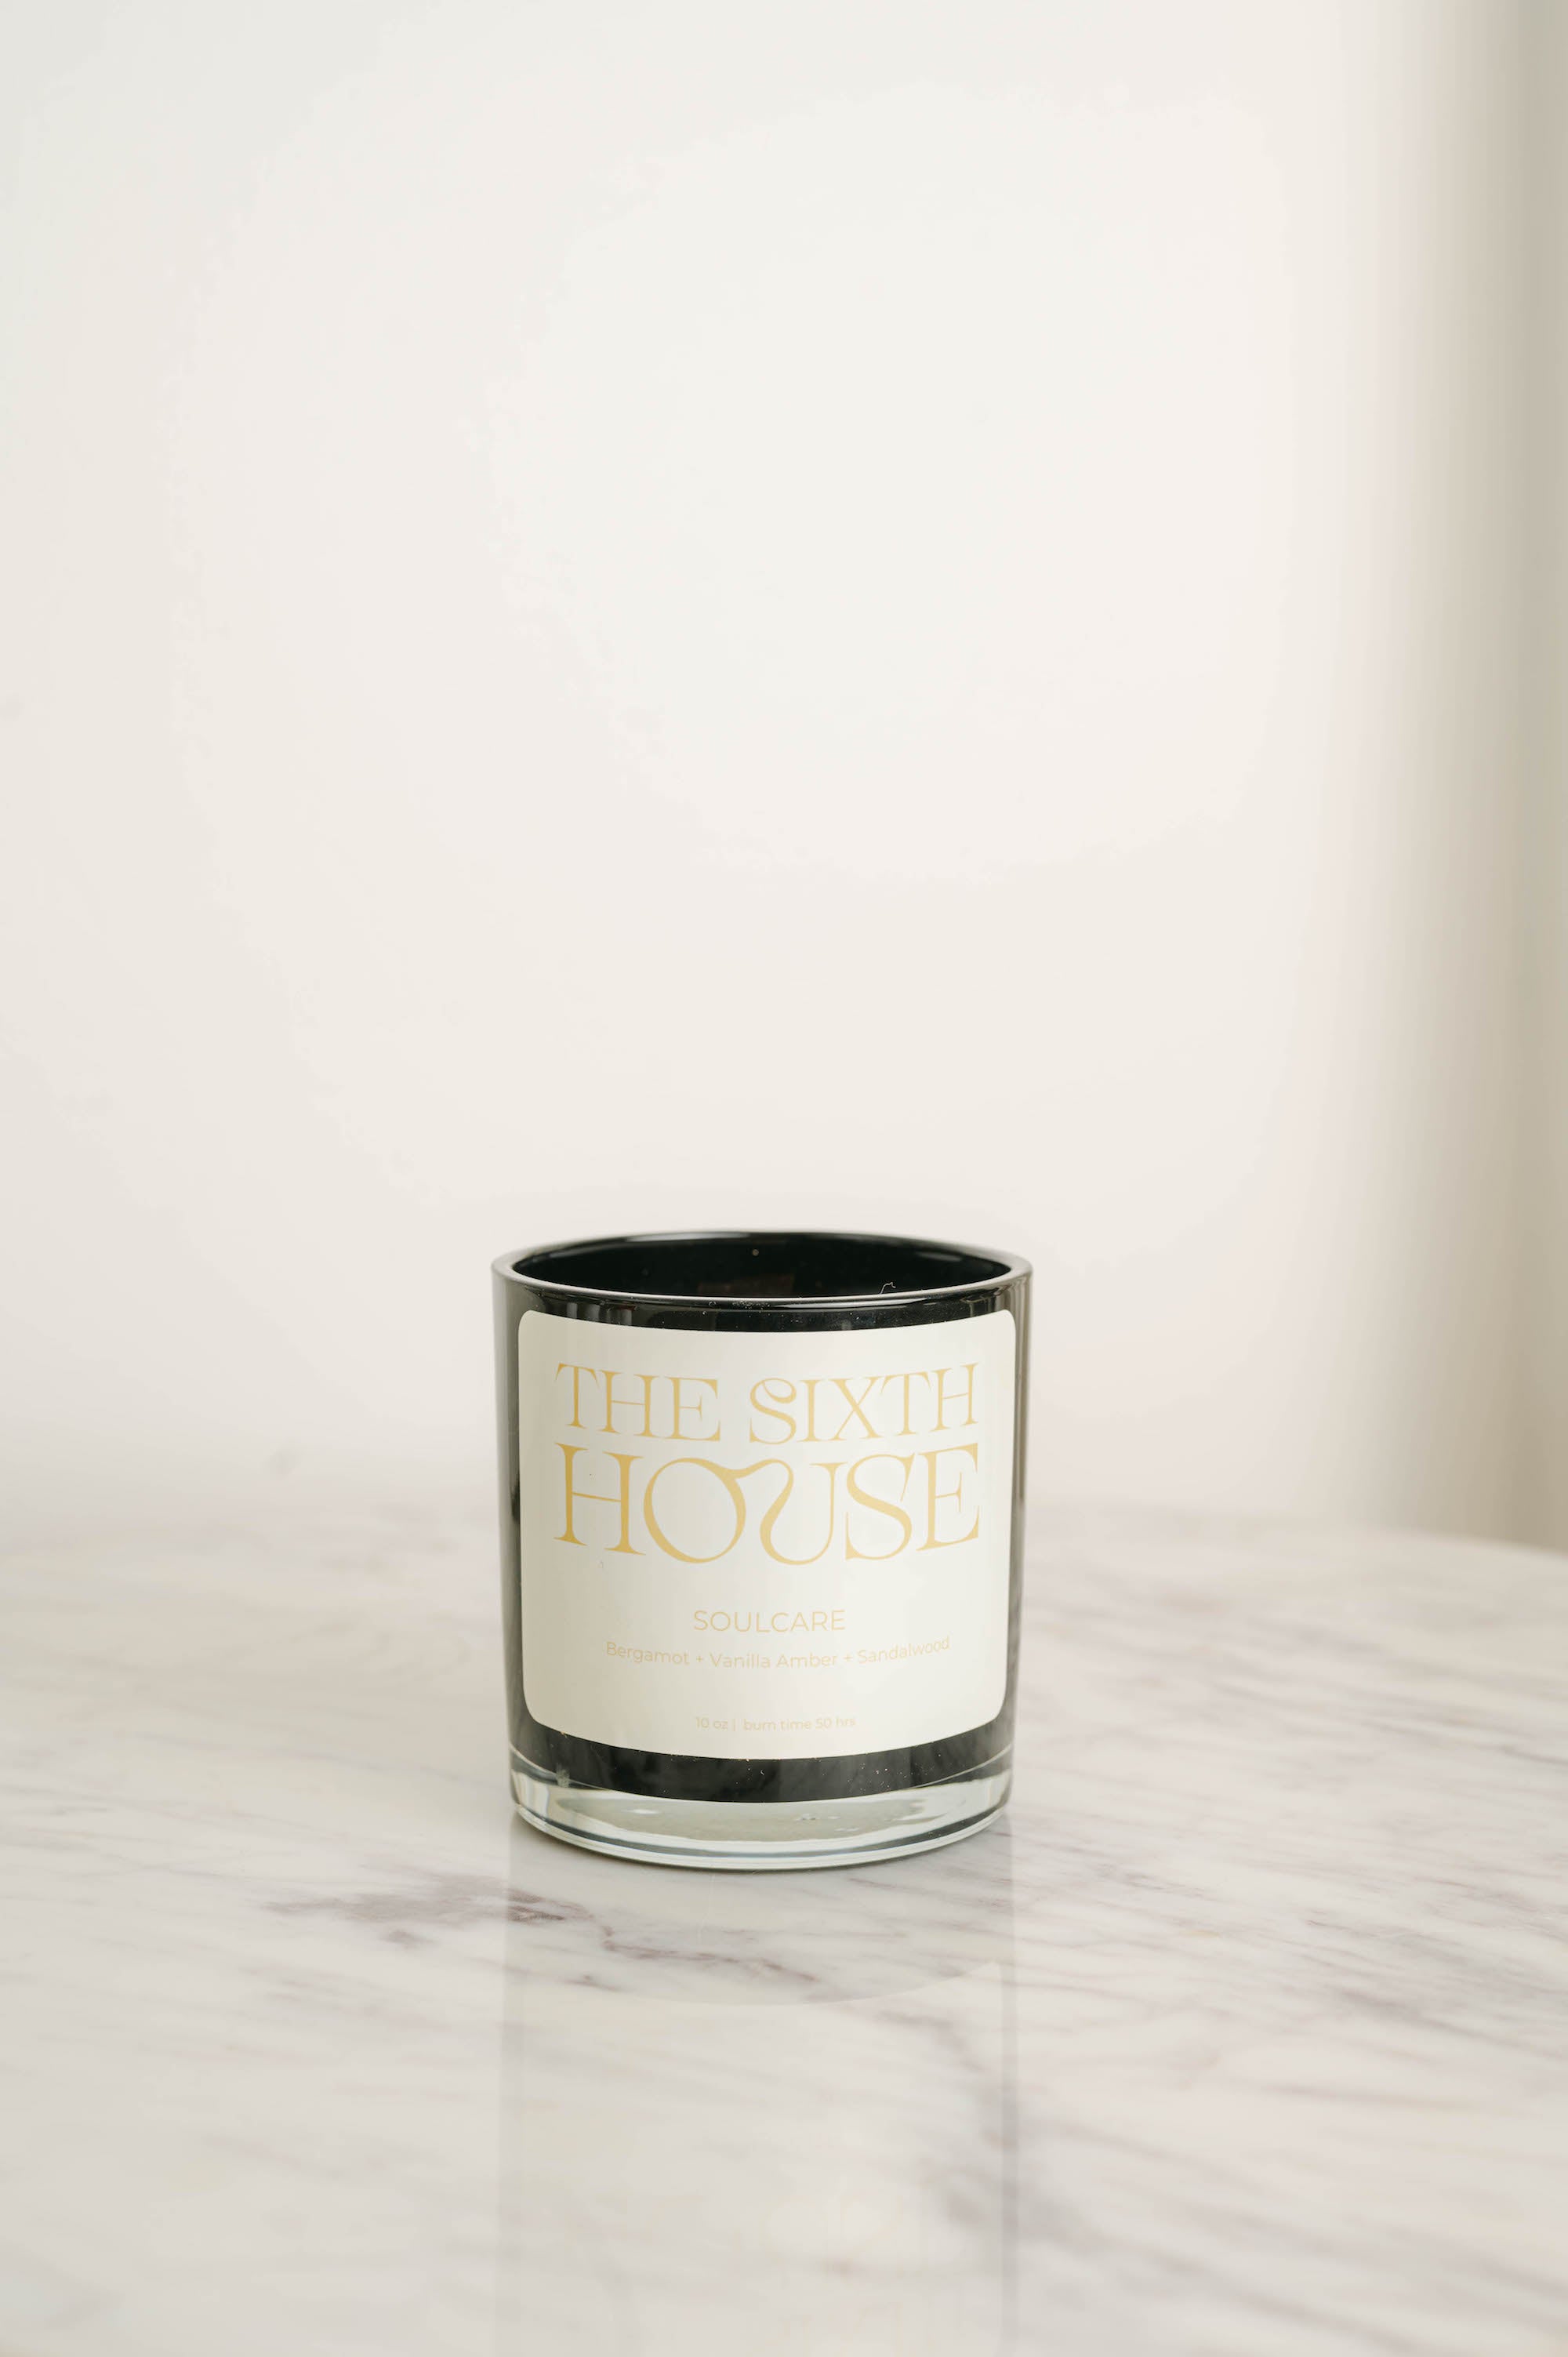 The Sixth House Soul Care Candle